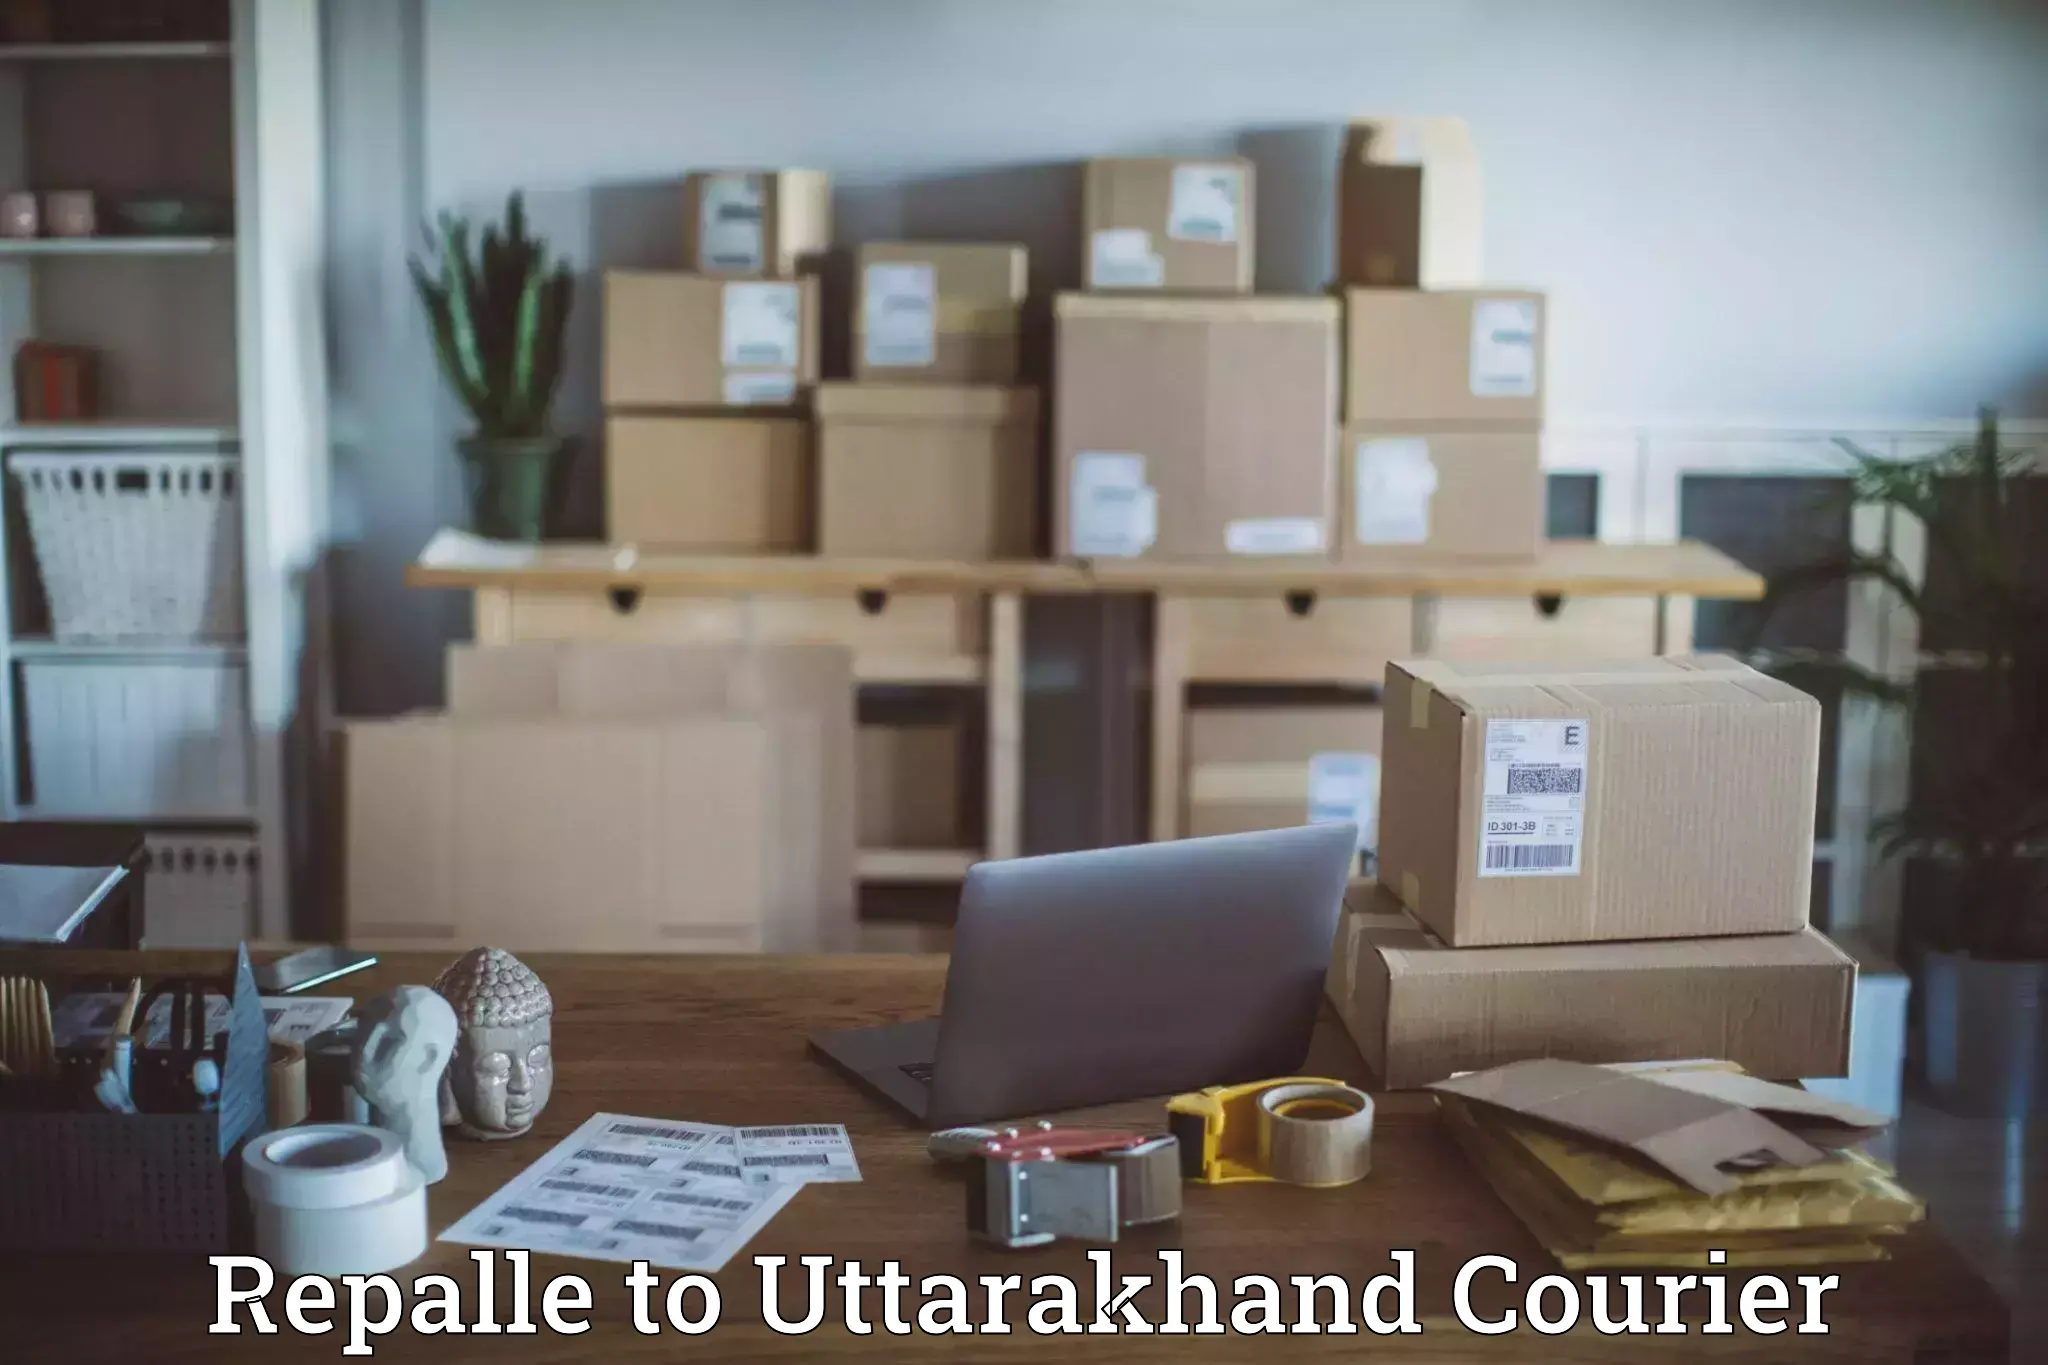 Personalized courier solutions Repalle to Uttarakhand